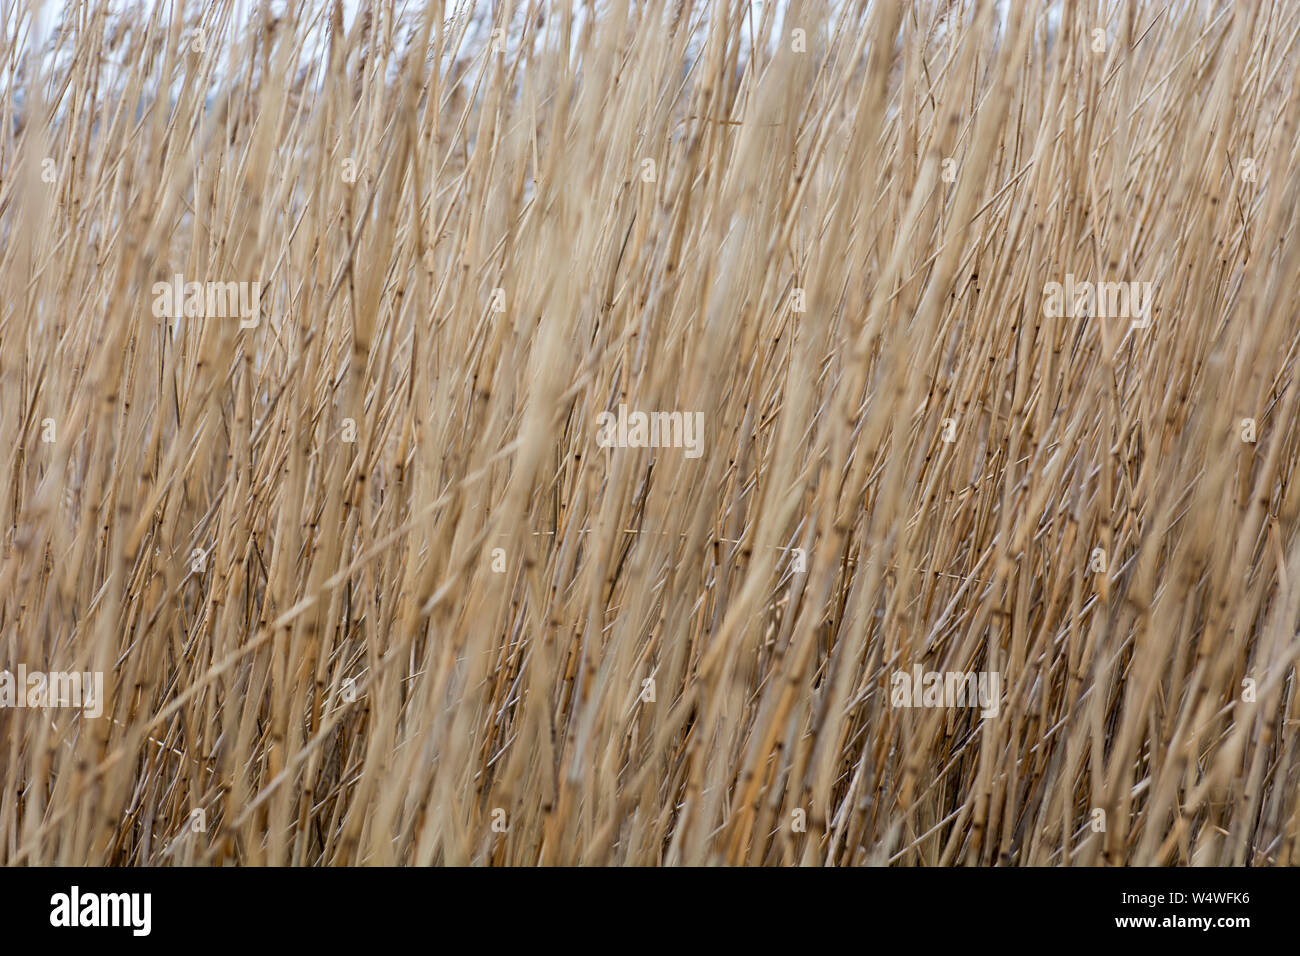 Background of reed, grass-like wetland plants in winter Stock Photo